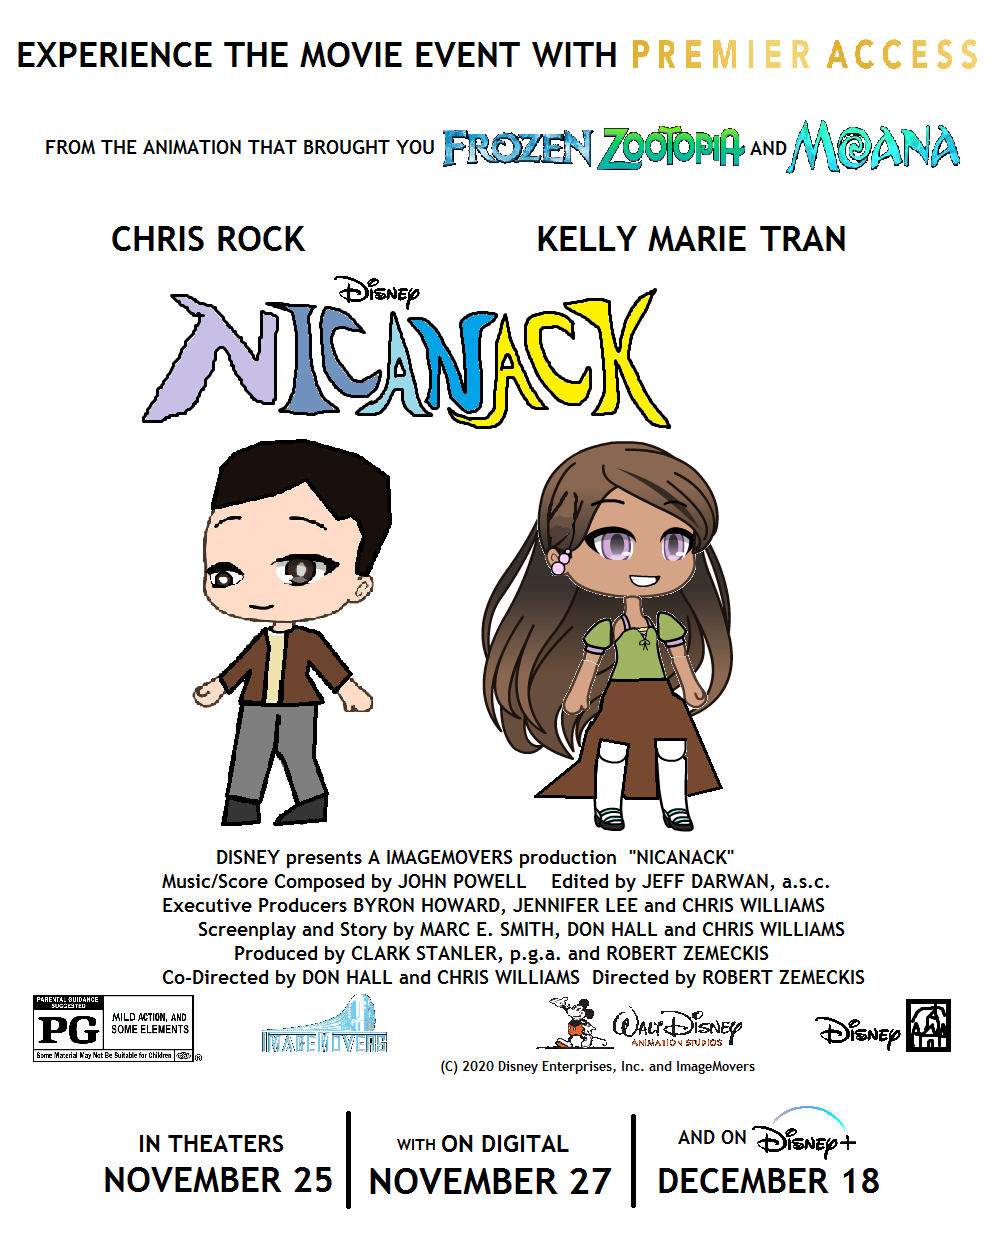 Nicanack Disney Fanmade Animated Mystery Fantasy Adventure Comedy Film The Jh Movie Collection S Official Wiki Fandom